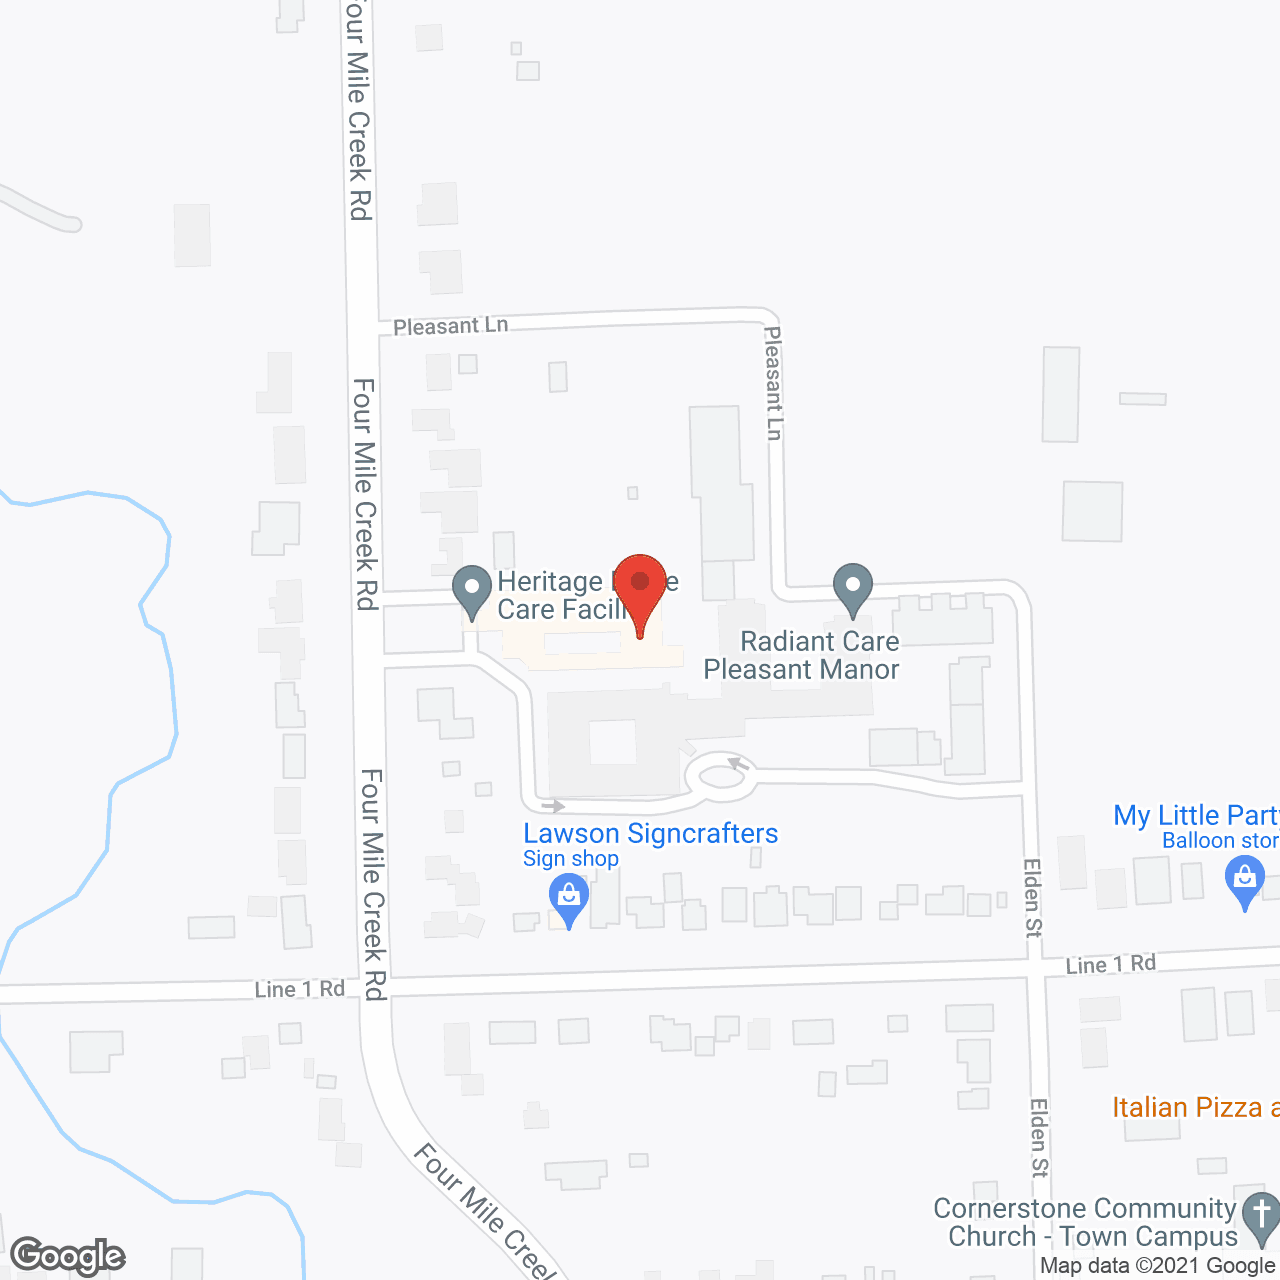 Heritage Place Care Facility in google map